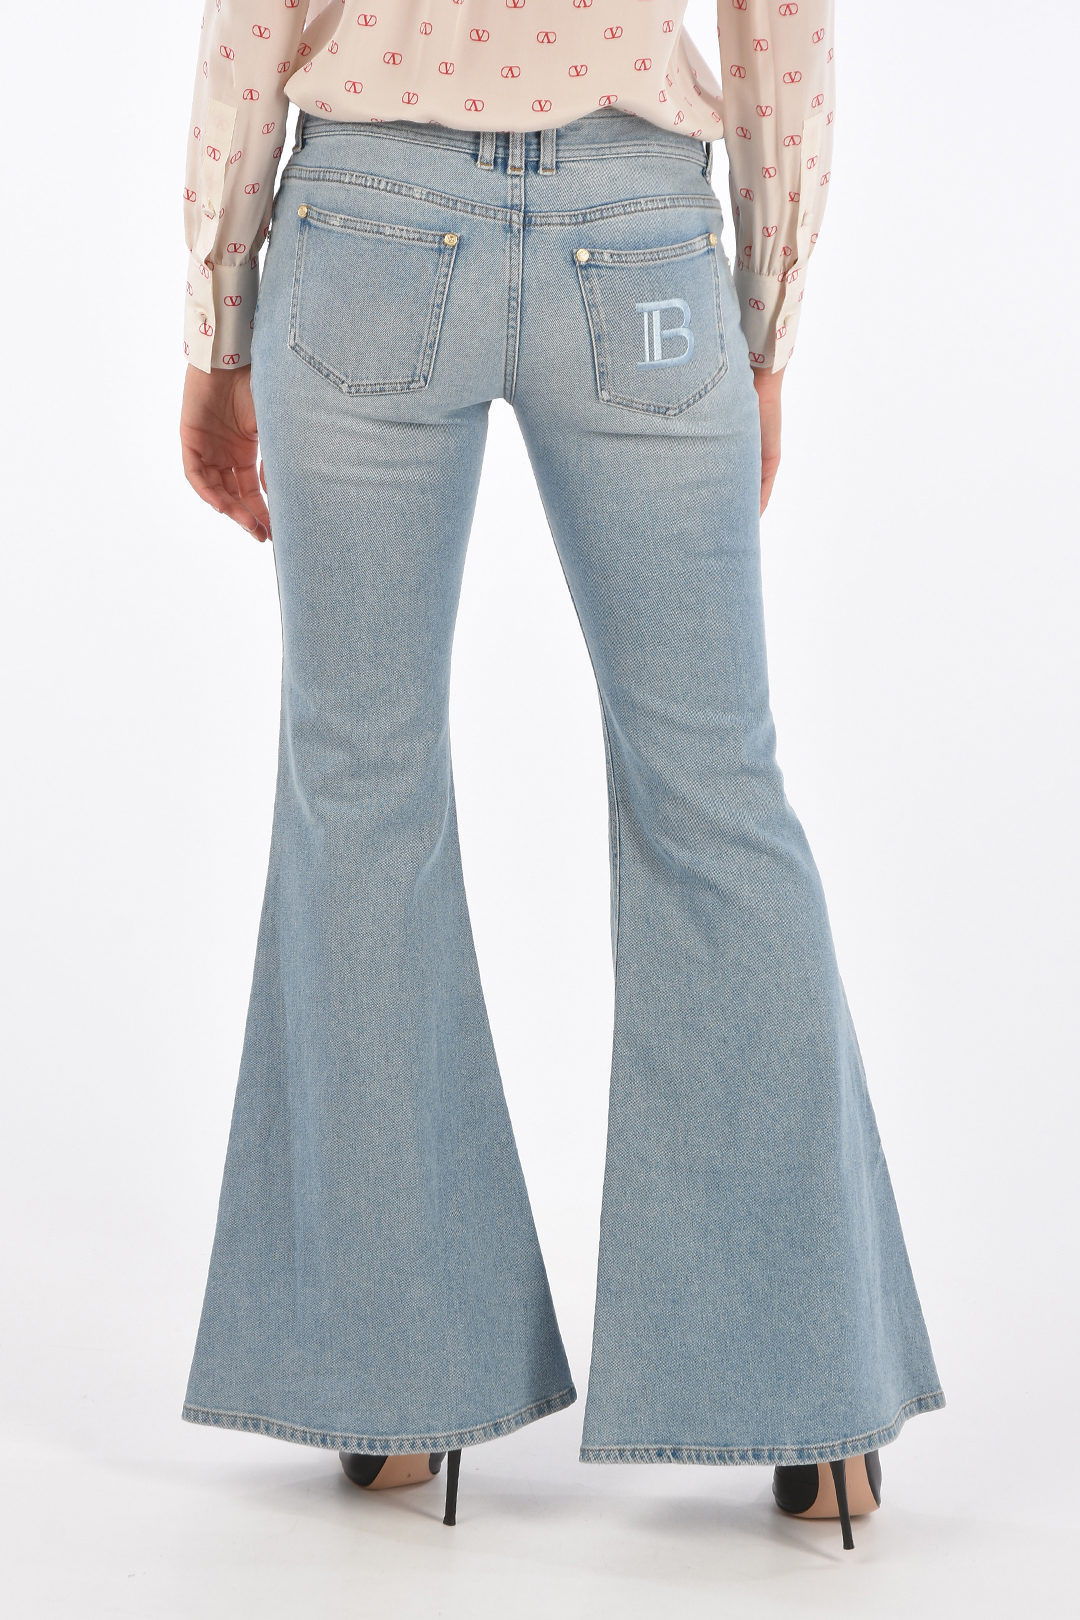 Shop Bootcut Trousers online in Cyprus  Free Same  Next Day Delivery